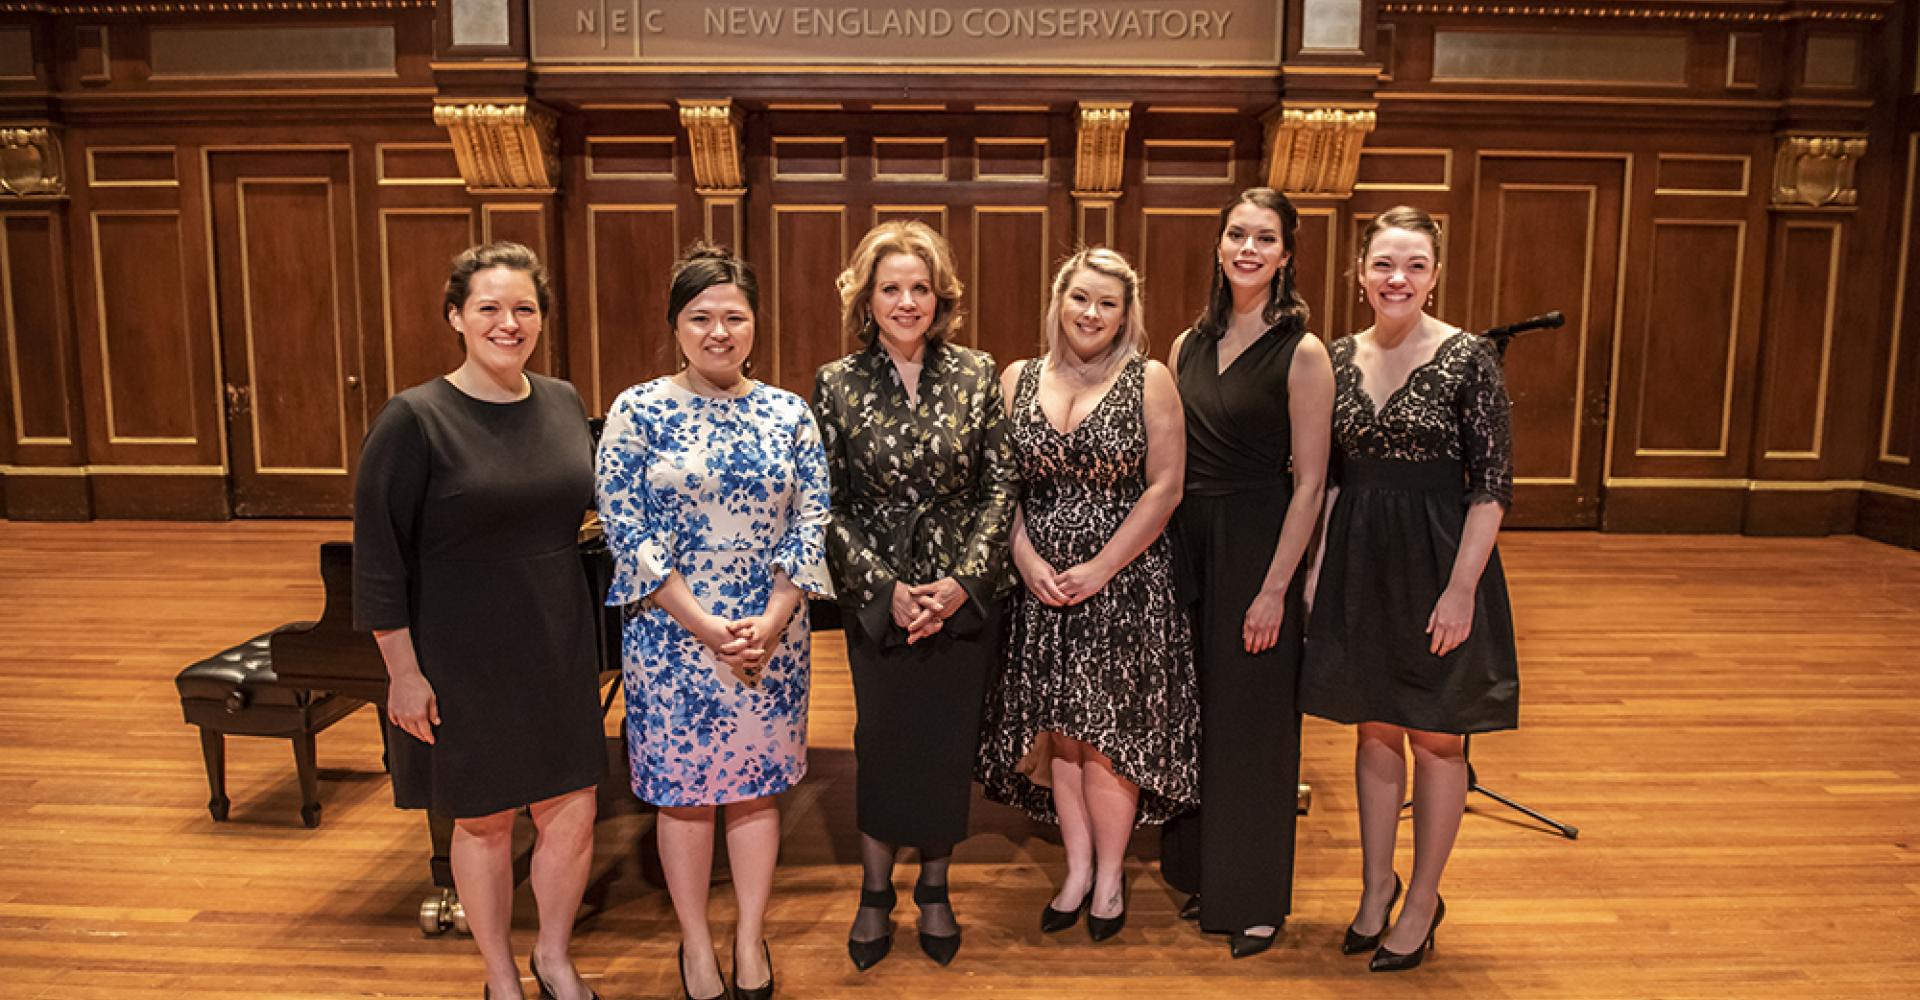 Renee Fleming with a group of students from her masterclass in jordan hall